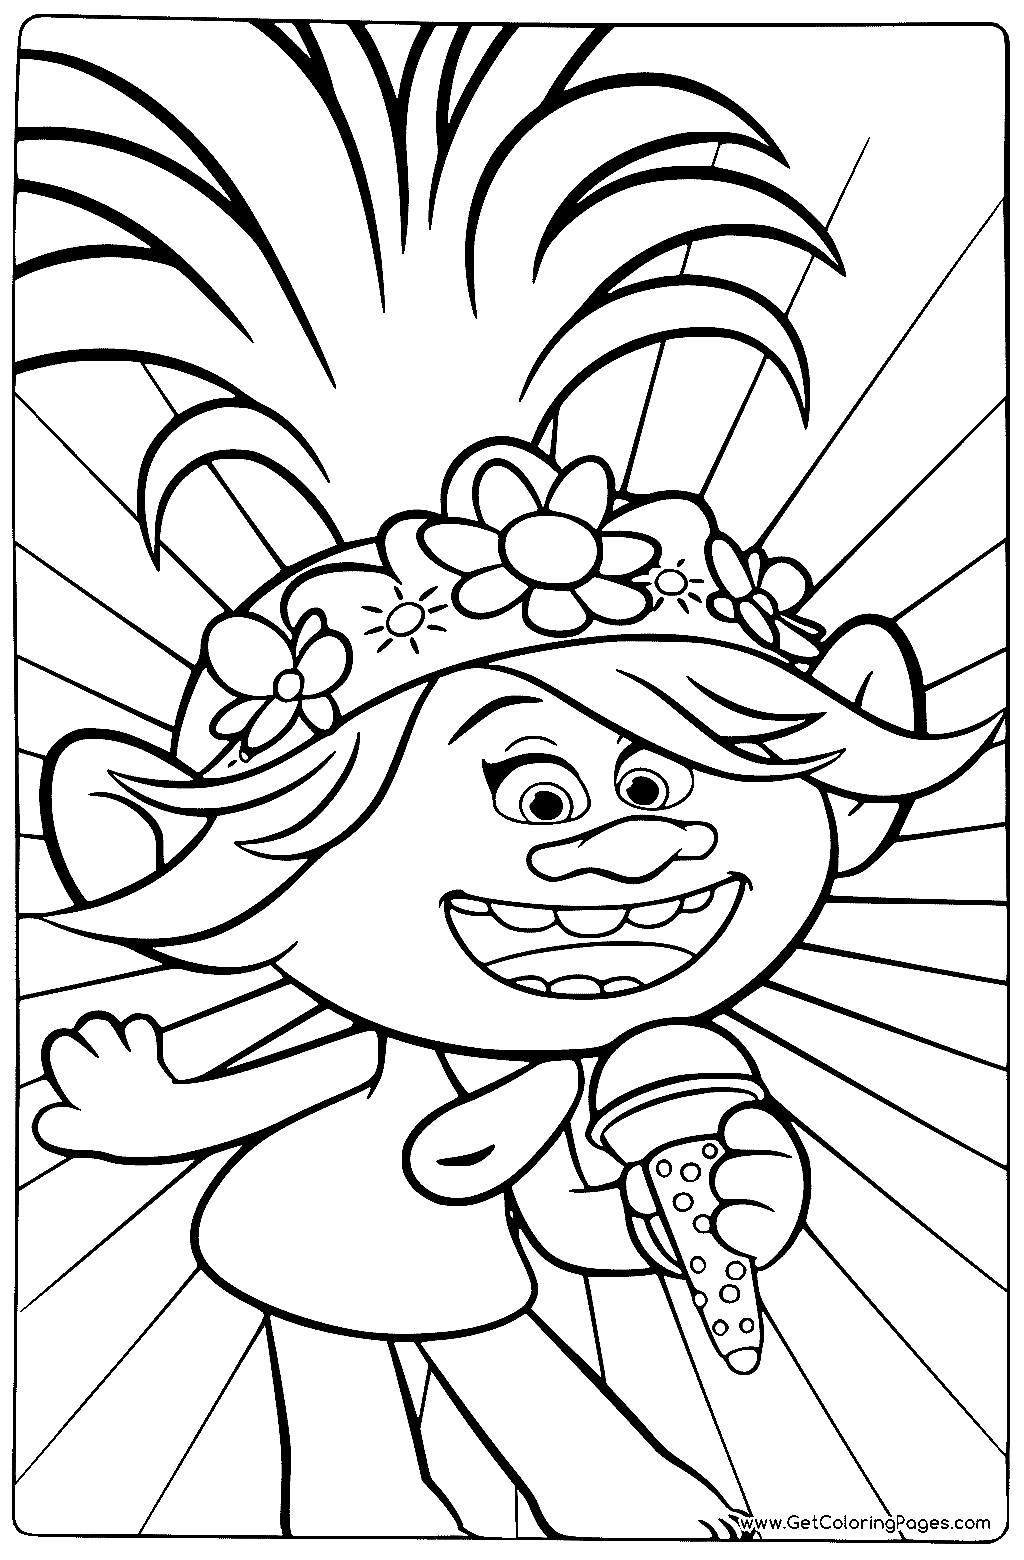 Poppy coloring pages printable for free download